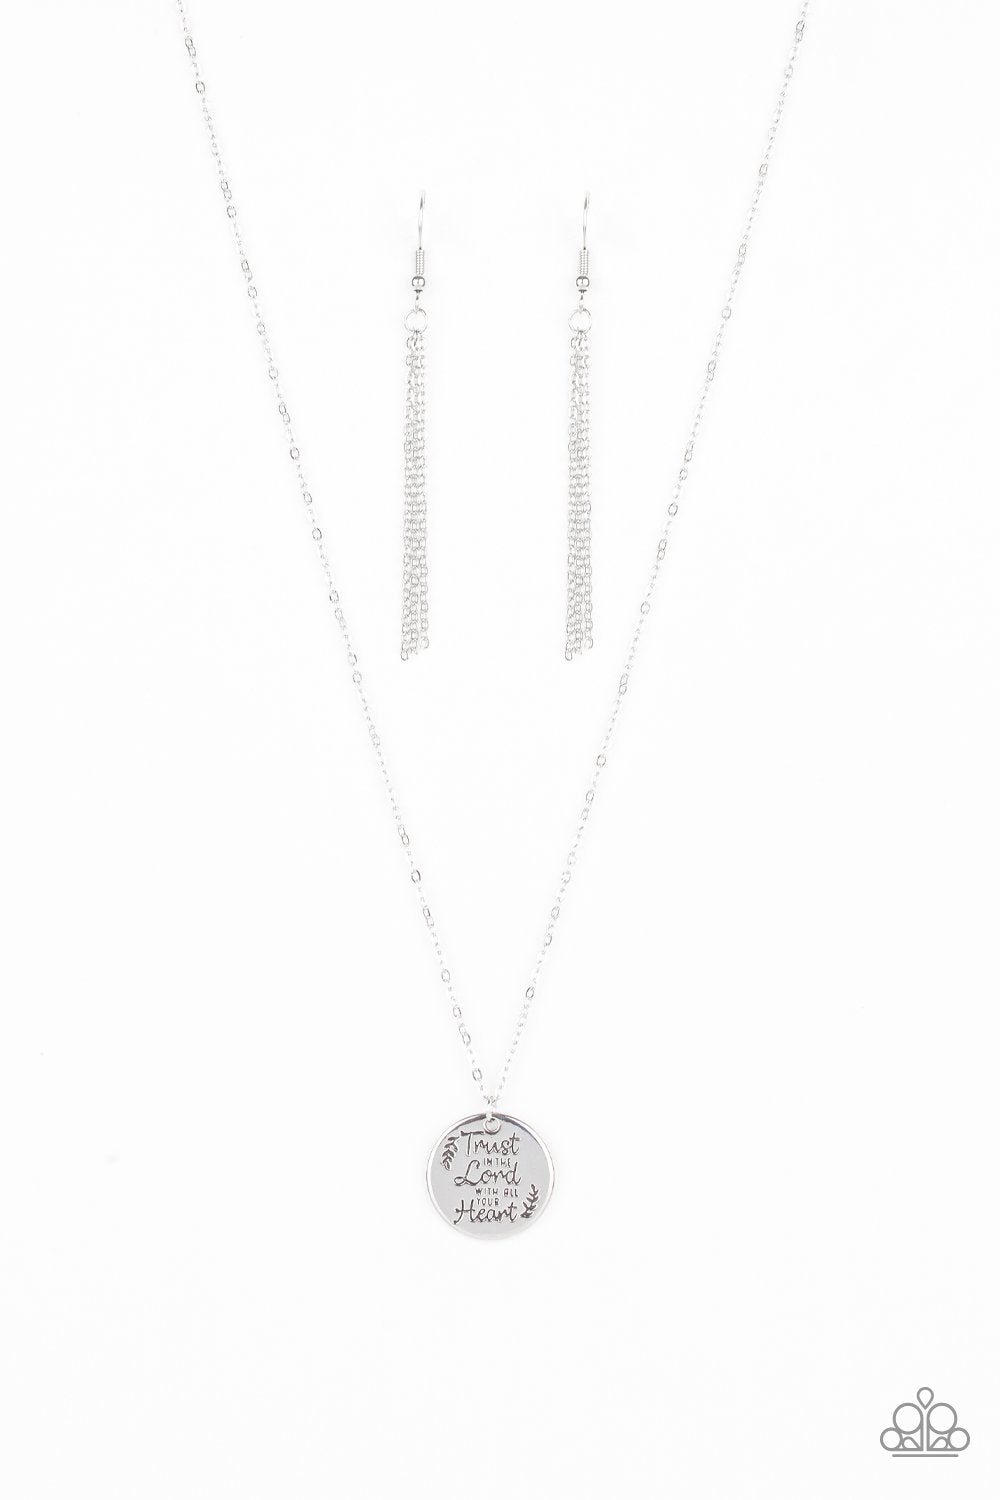 All You Need Is Trust Silver Necklace - Paparazzi Accessories-CarasShop.com - $5 Jewelry by Cara Jewels